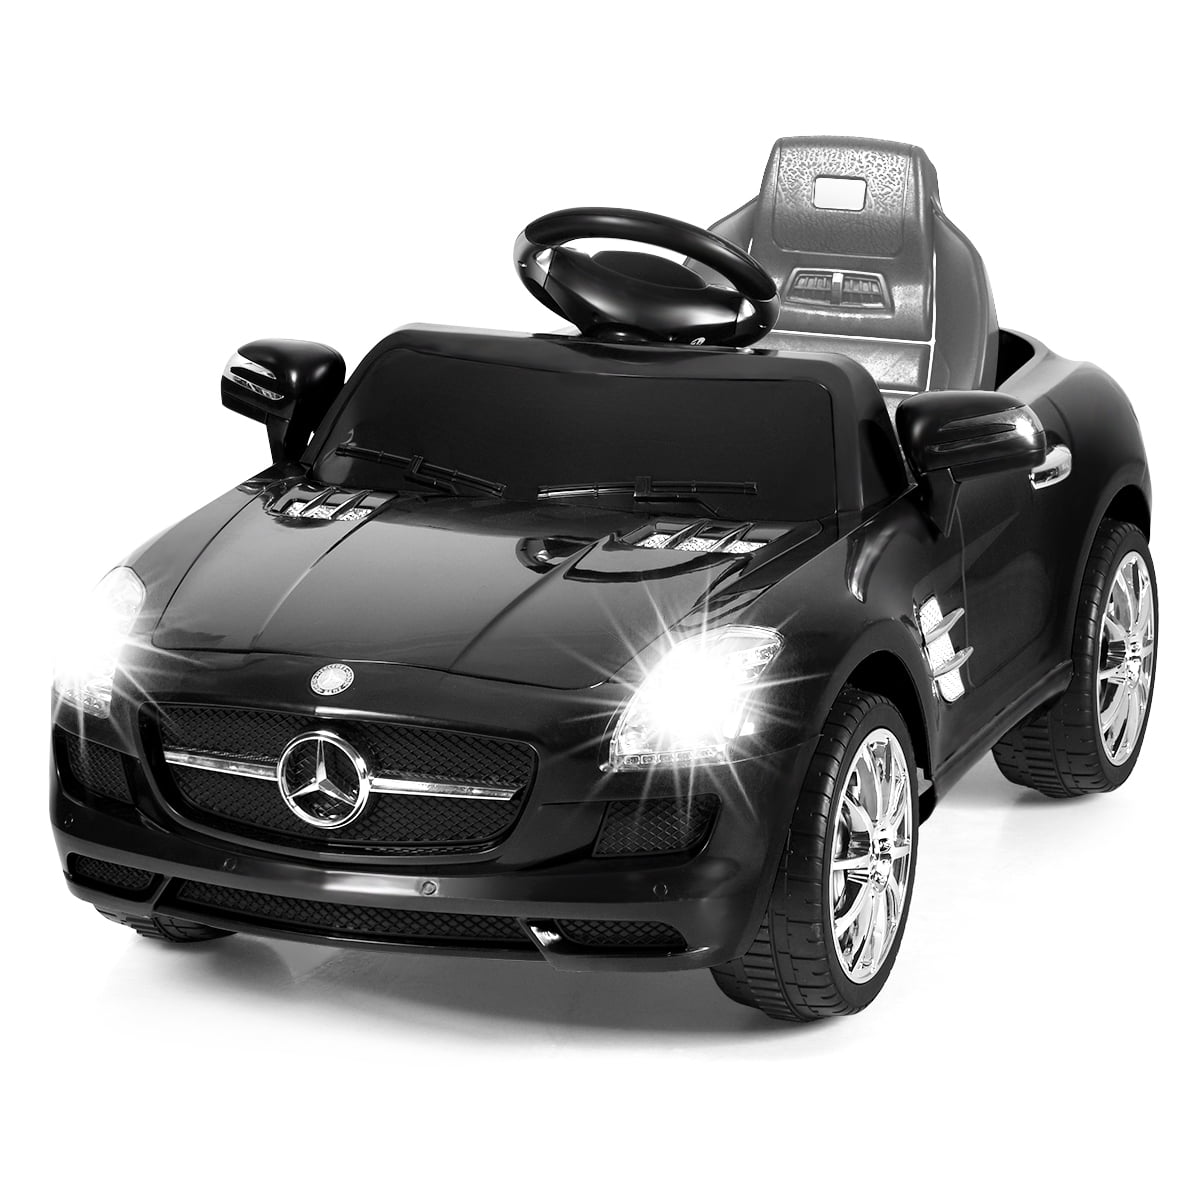 Details about   Kids Ride On Car Mercedes-Benz Licensed Electric Toy w/ Control Carry Handle MP3 